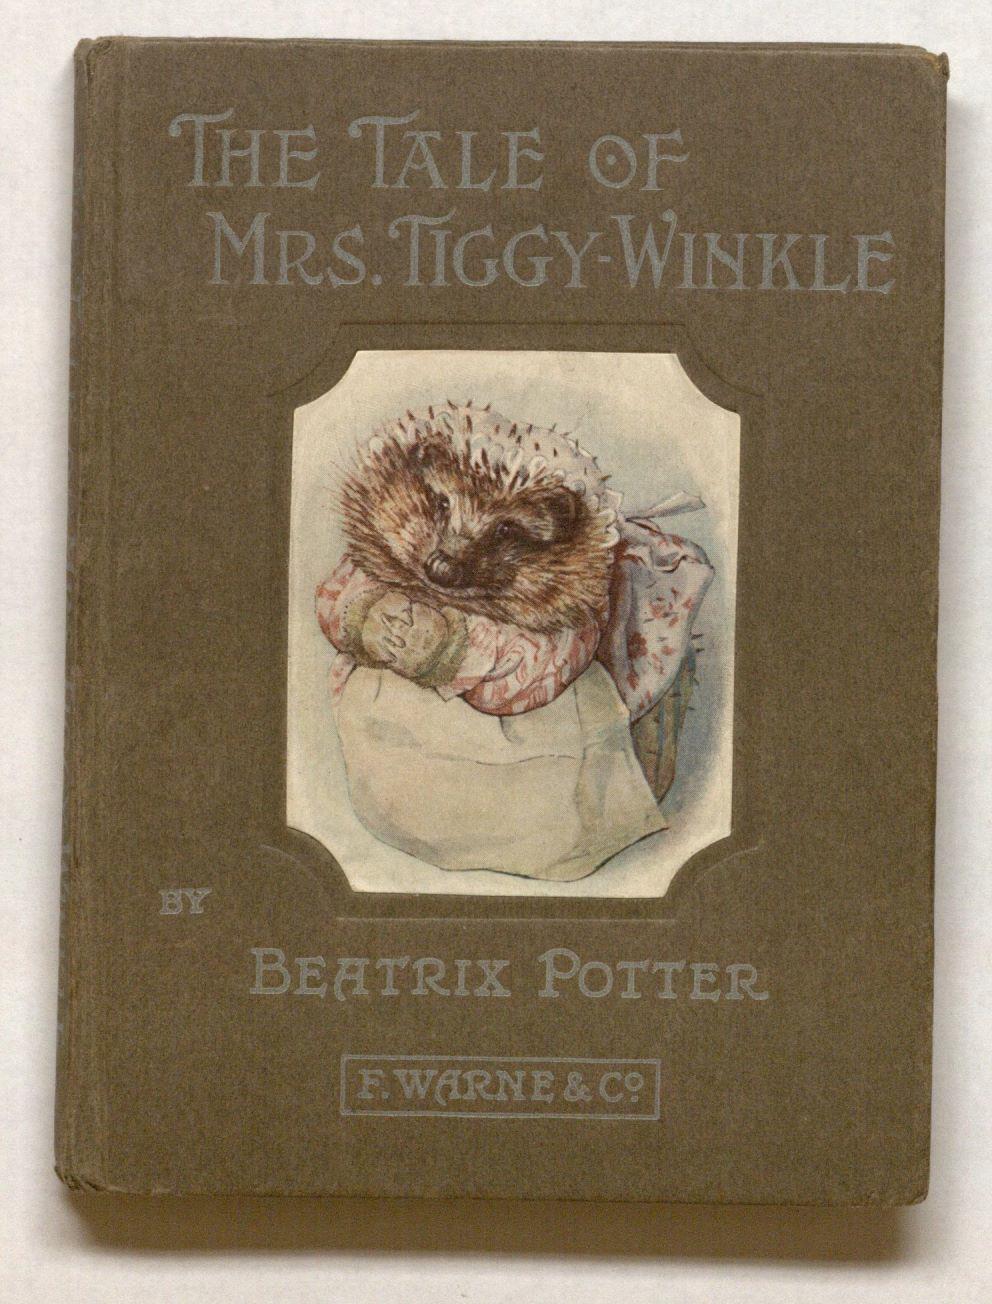 Front cover of Beatrix Potter’s The tale of Mrs. Tiggy-Winkle published in New York by Frederick Warne & Co. in 1905.